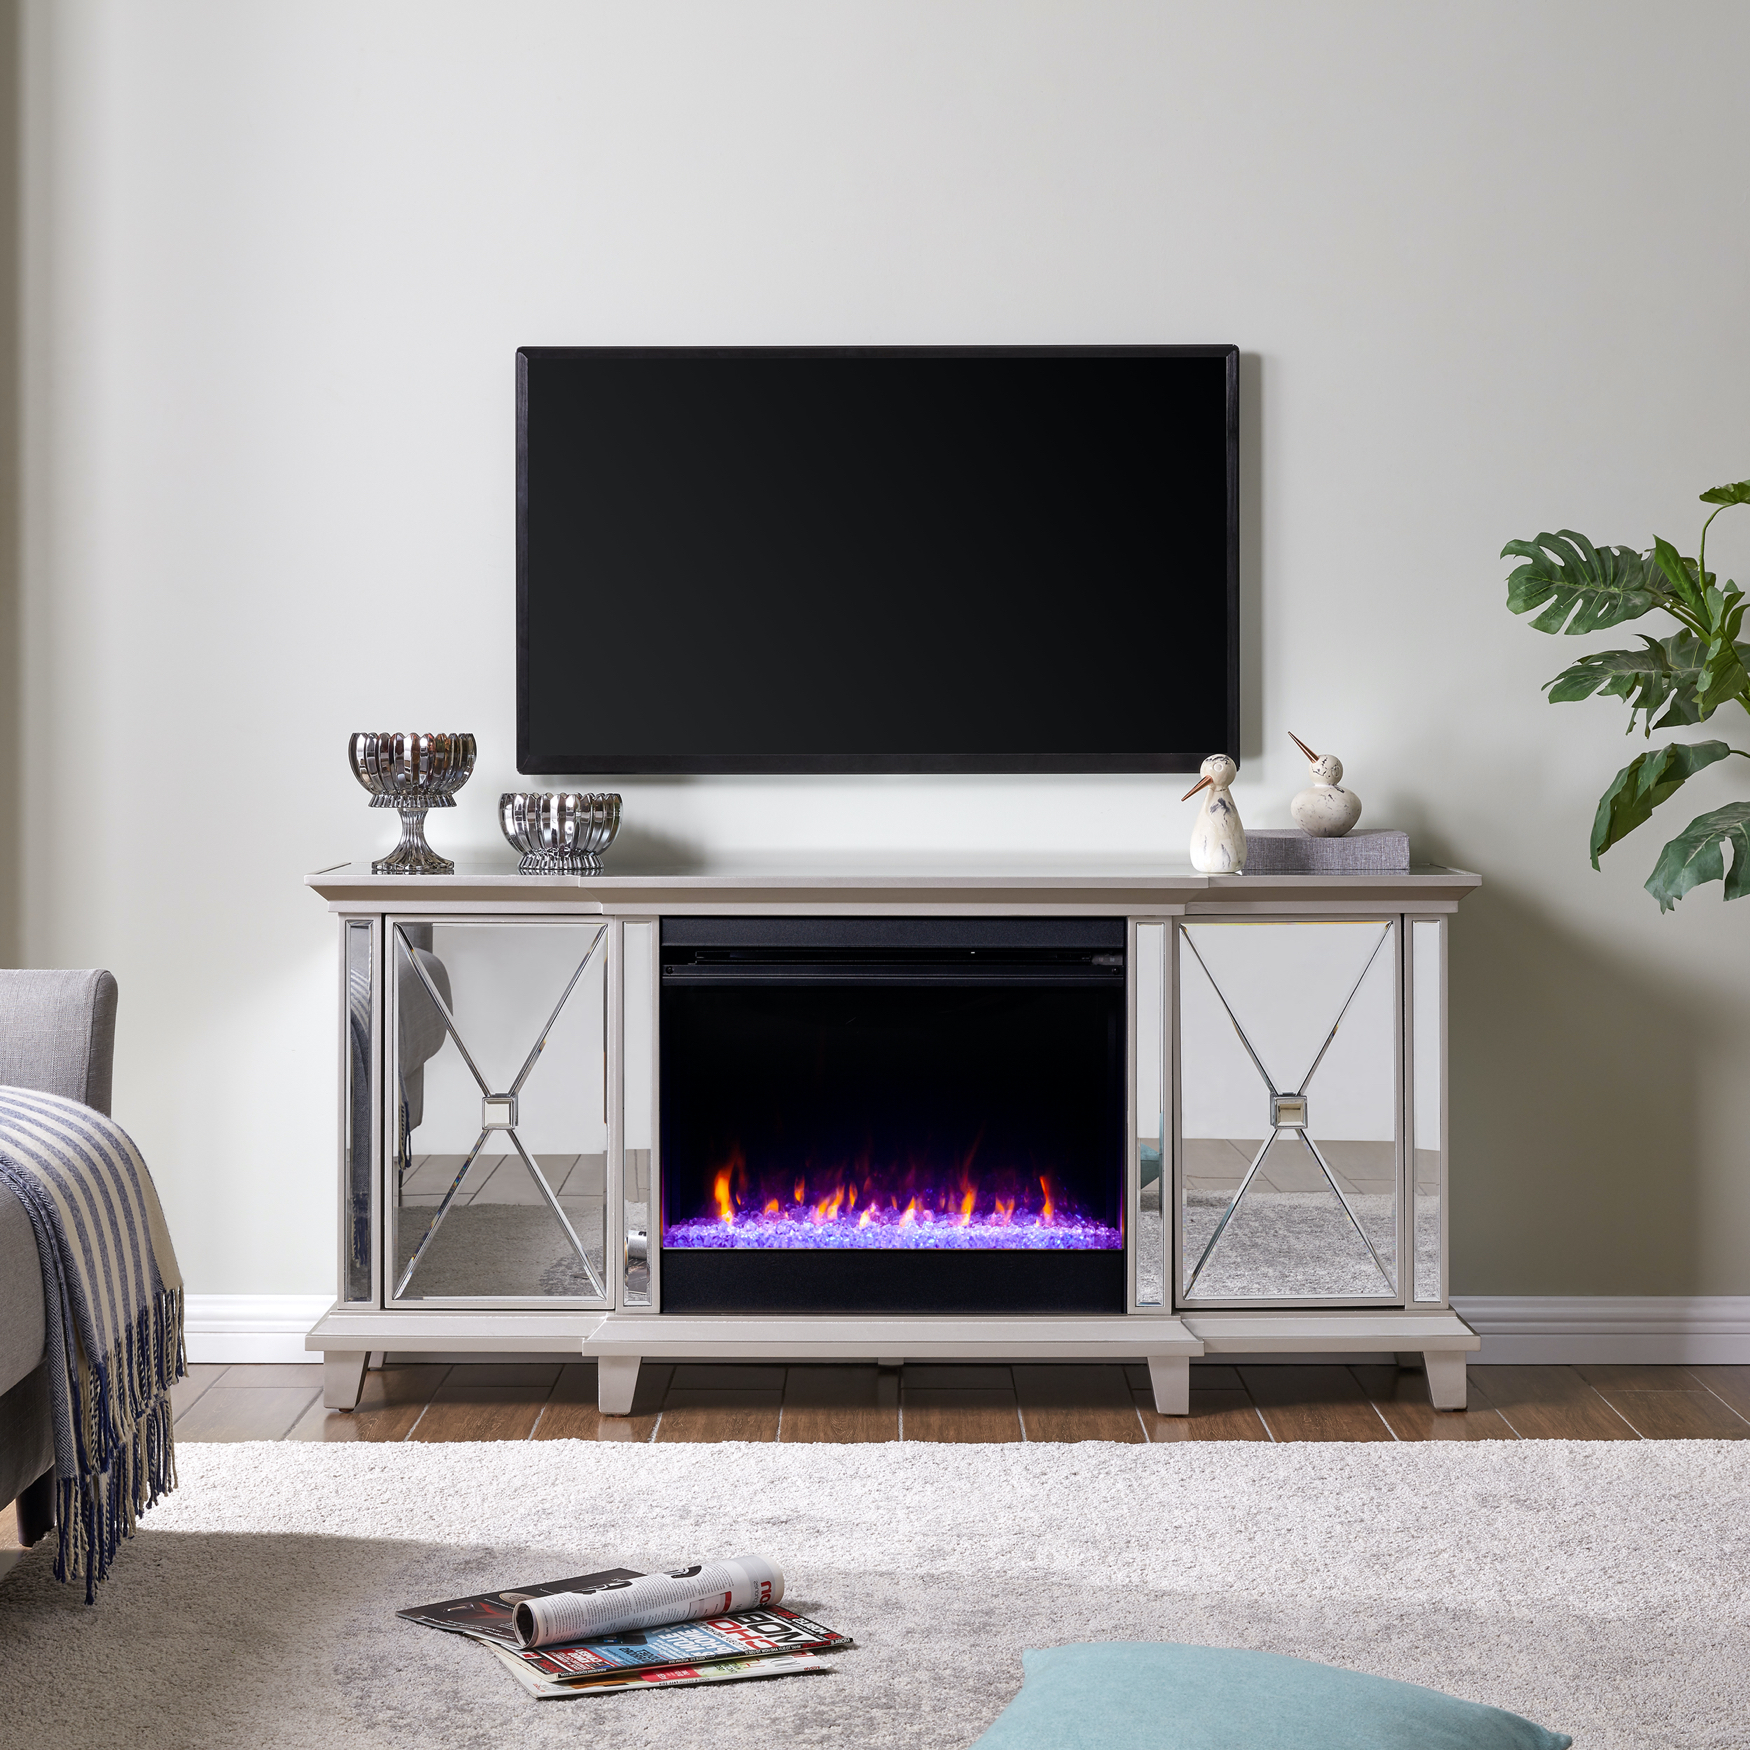 Toppington Mirrored Lifelike Alternating Colors Fireplace Media Console, MIRROR